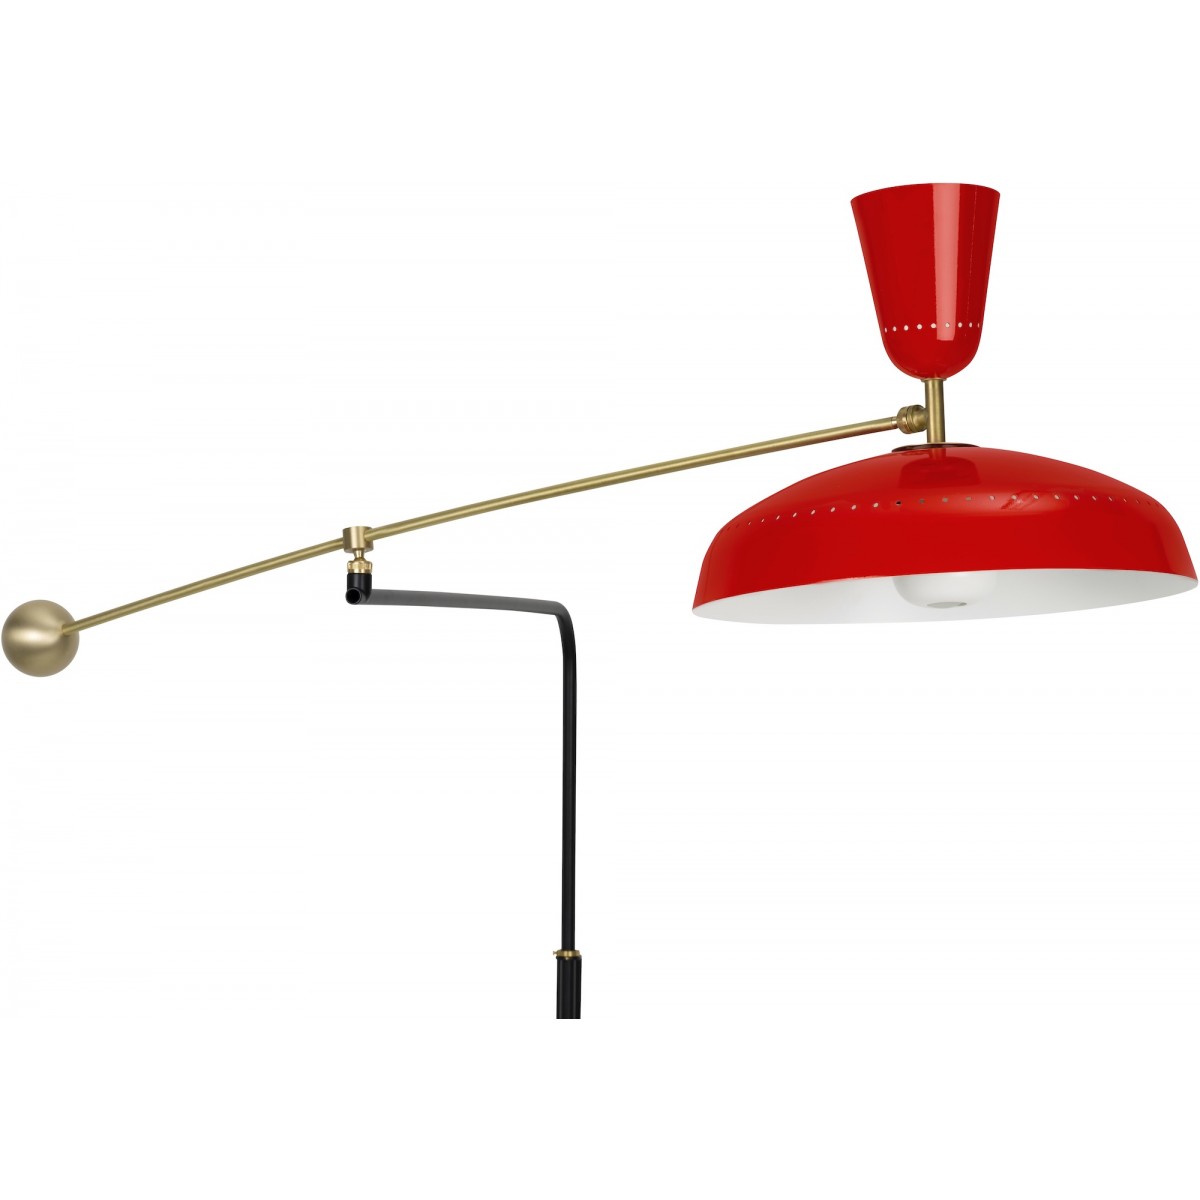 Vermilion red – G1 wall lamp